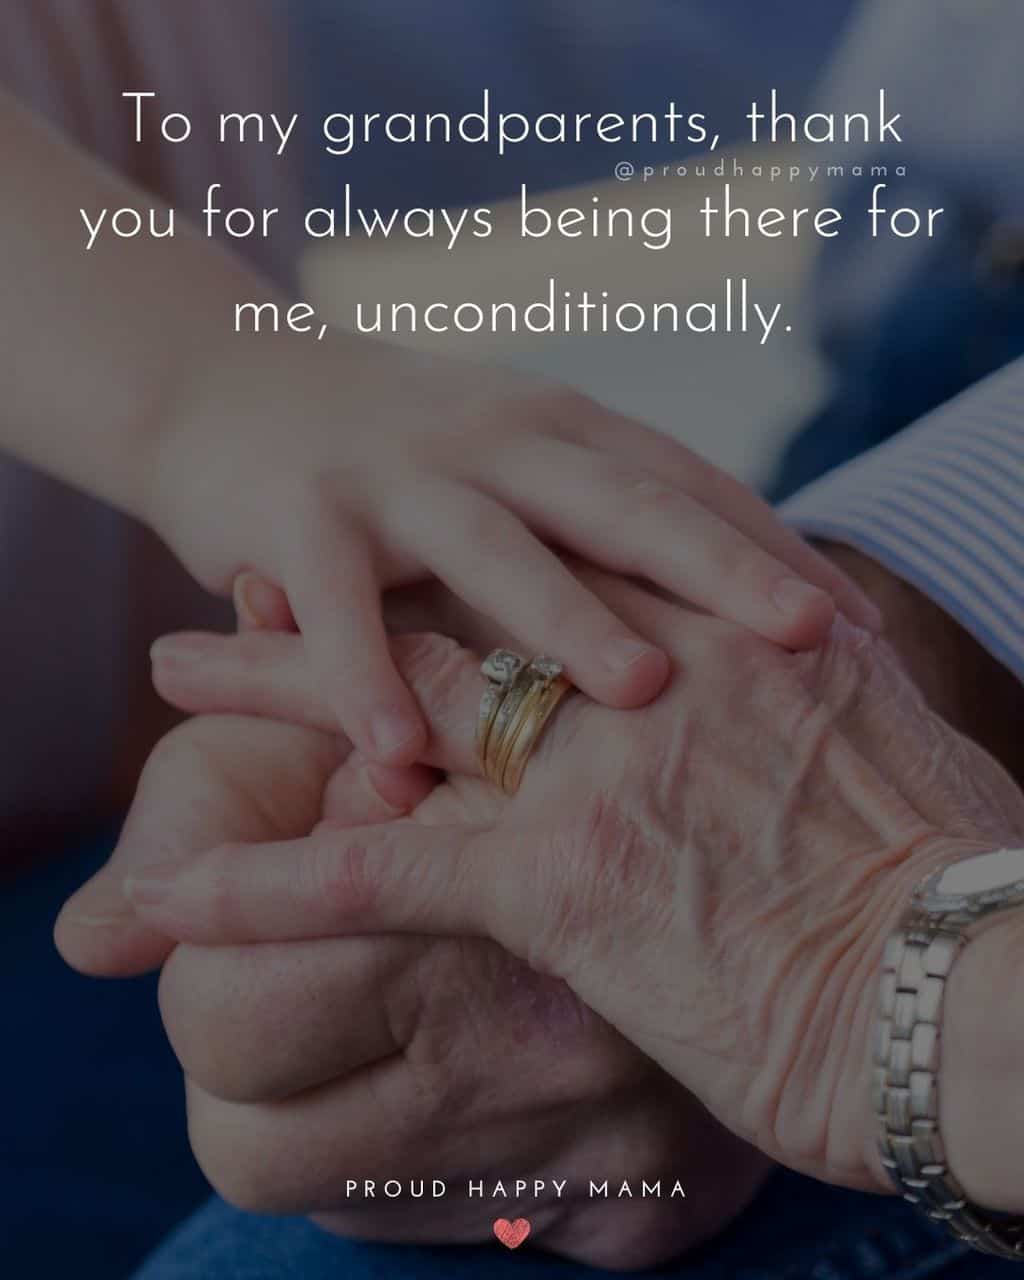 Grandparent Quotes – To my grandparents, thank you for always being there for me, nconditionally.’